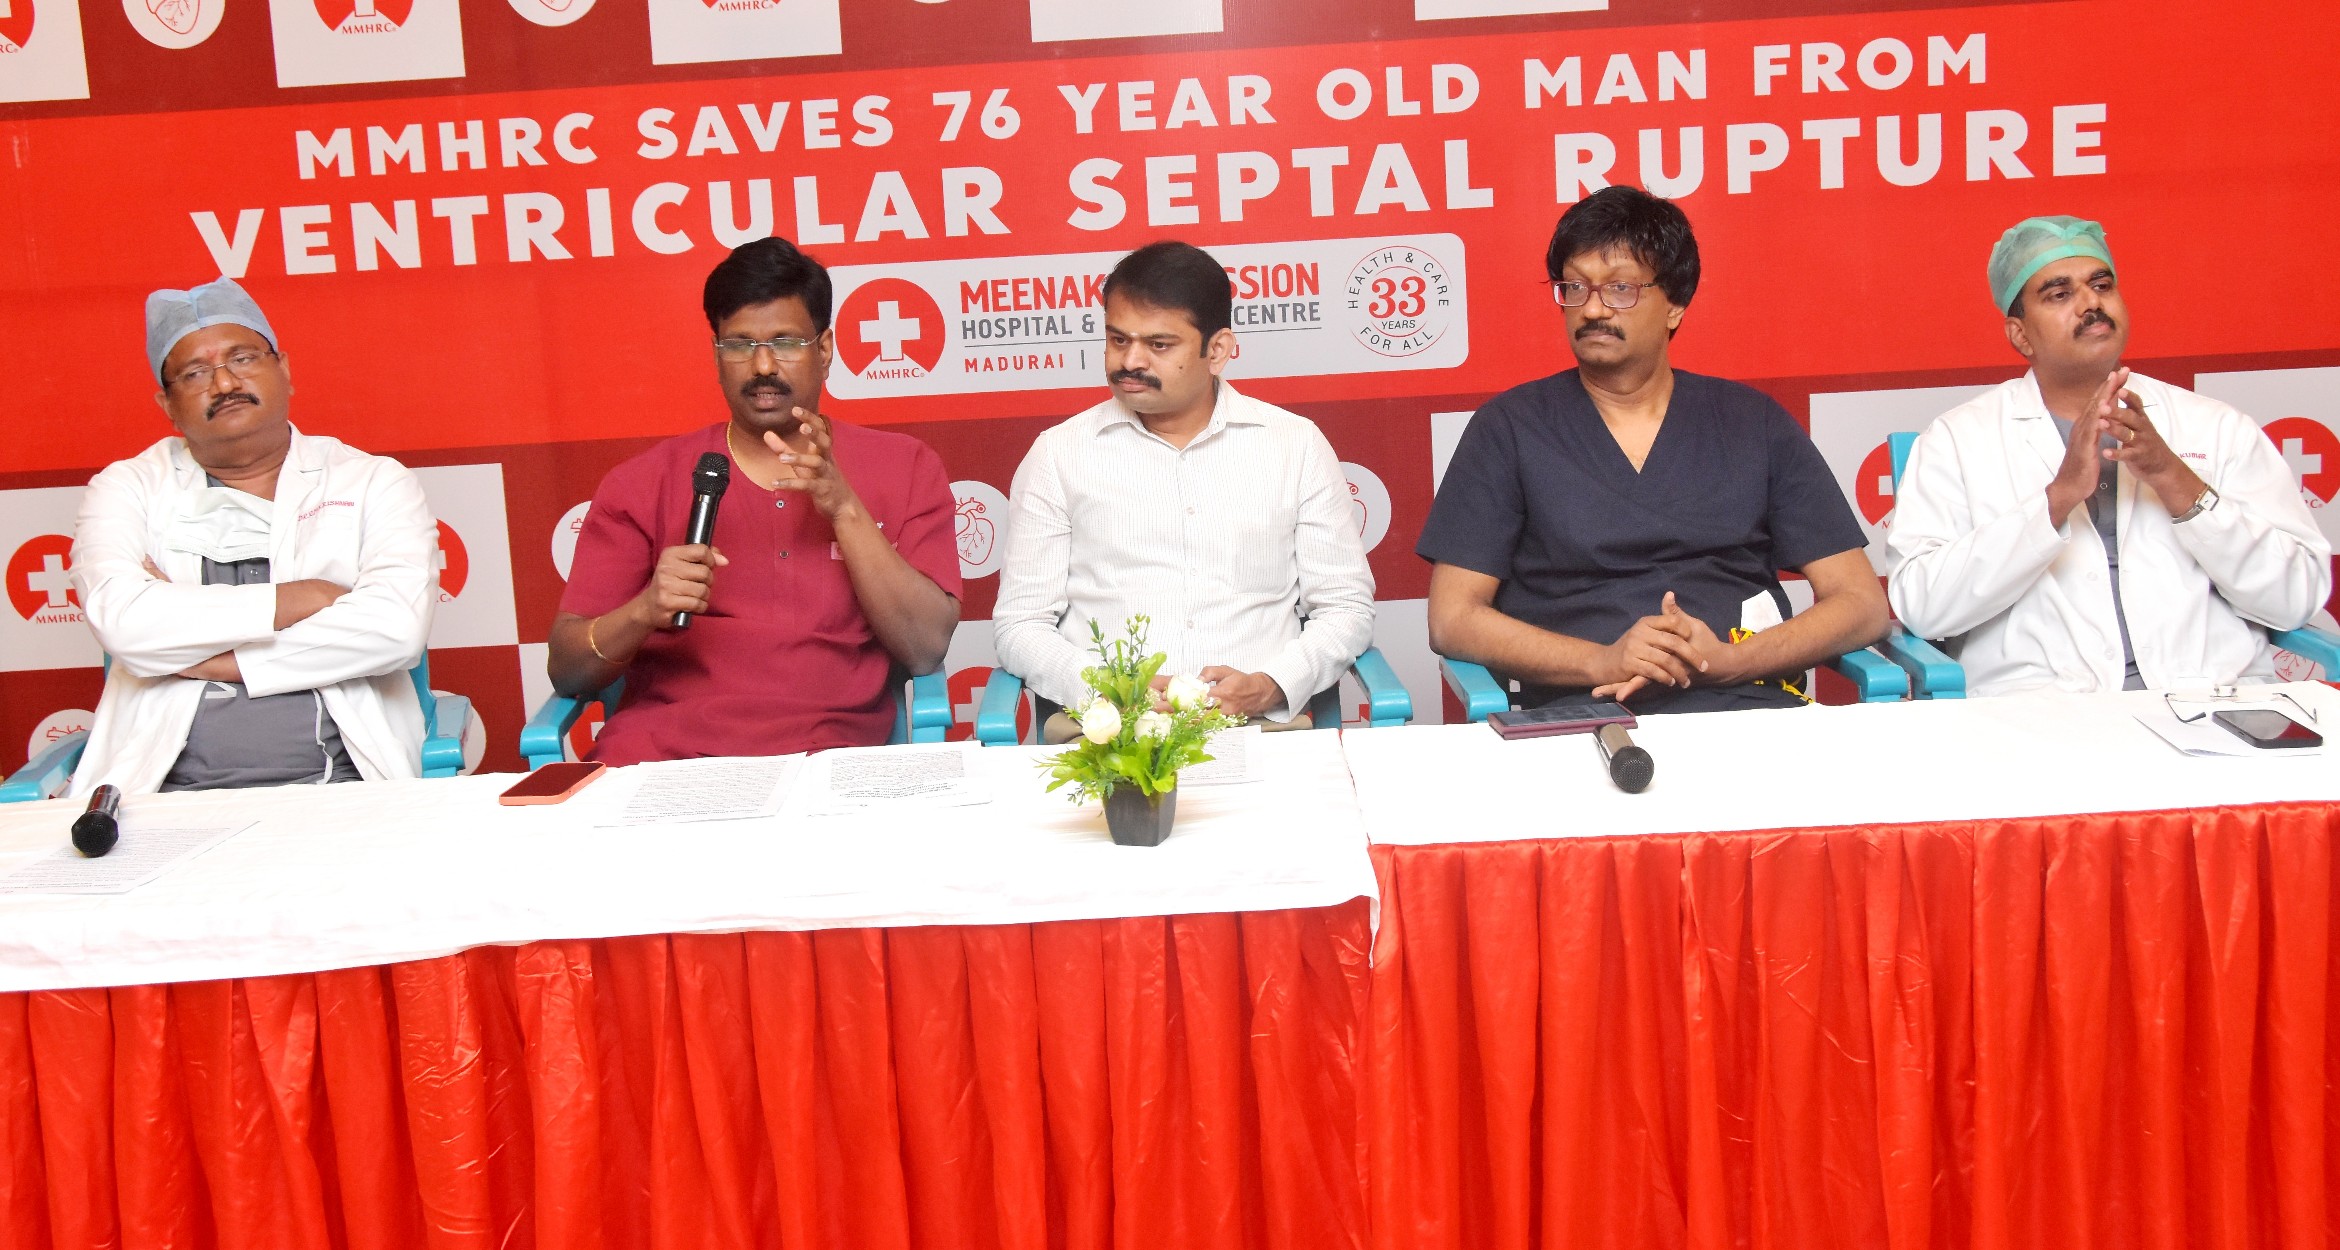 Meenakshi Mission Hospital saves a 76 years old man from deadly heart rupture